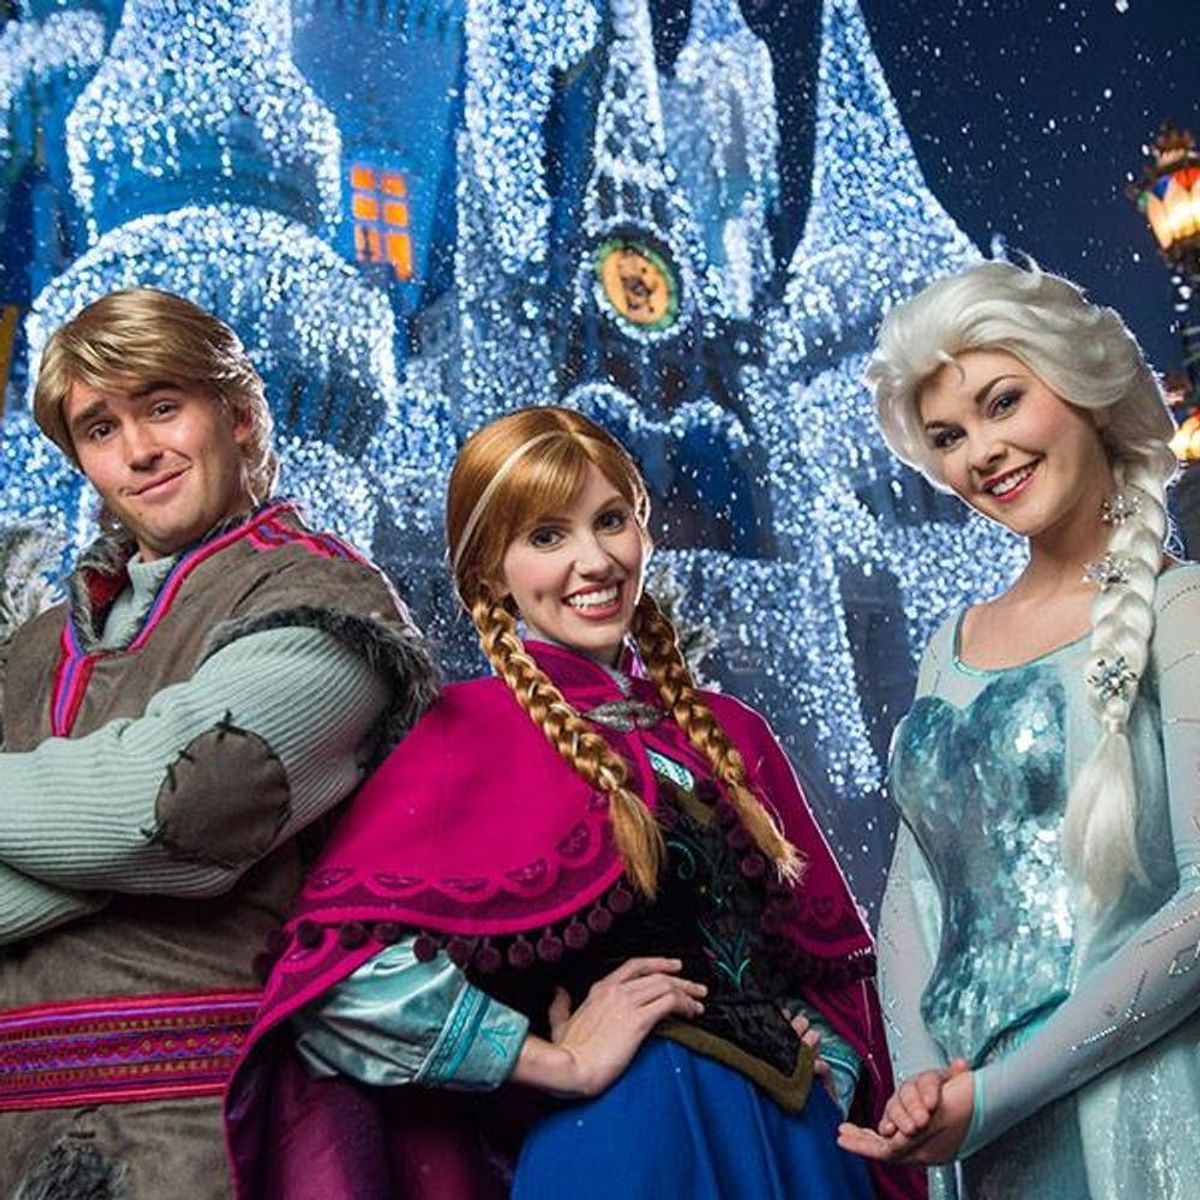 Why Disney’s Hyped New “Frozen” Ride Is Likely Making People Super Mad